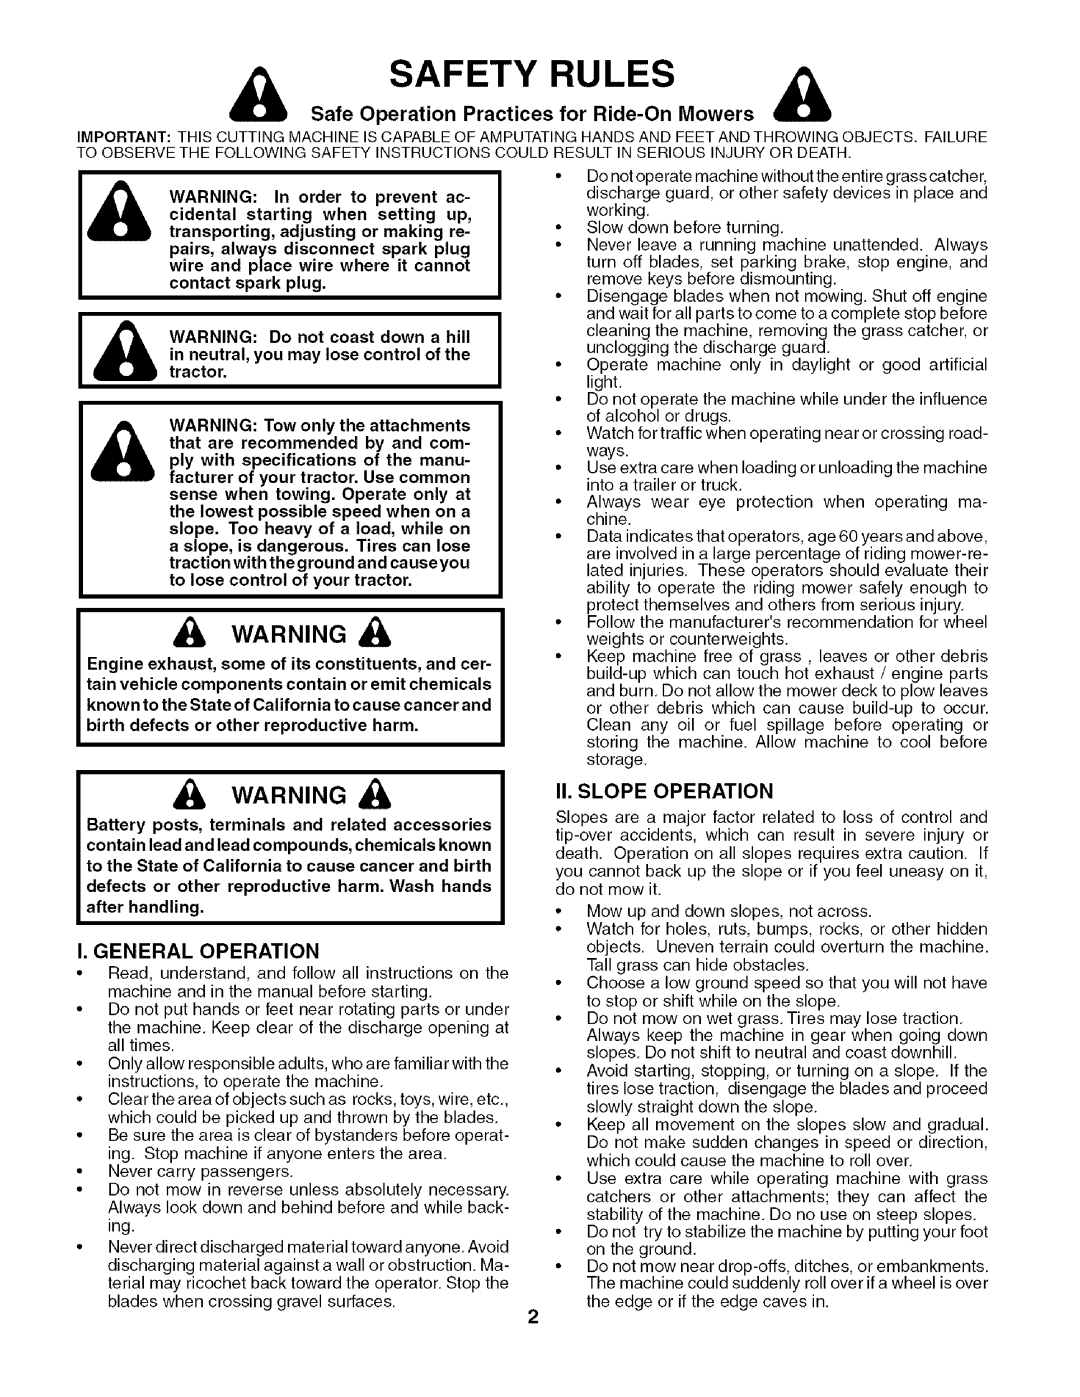 Husqvarna 917.27909 owner manual Safe Operation Practices for Ride-On Mowers, General Operation, II. Slope Operation 